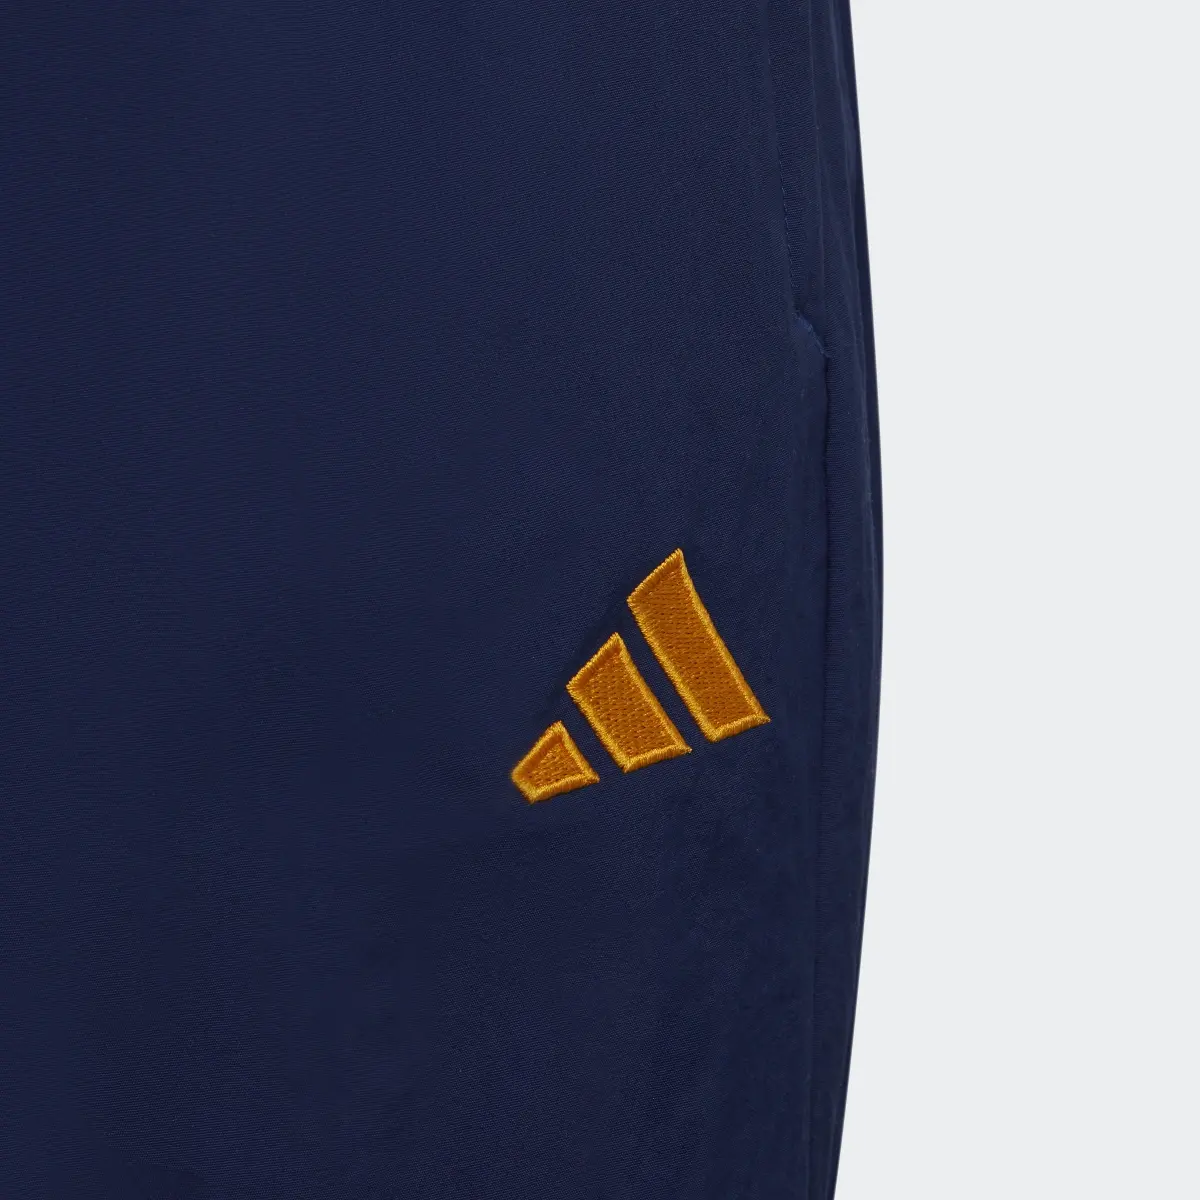 Adidas Spain Travel Tracksuit Bottoms. 3